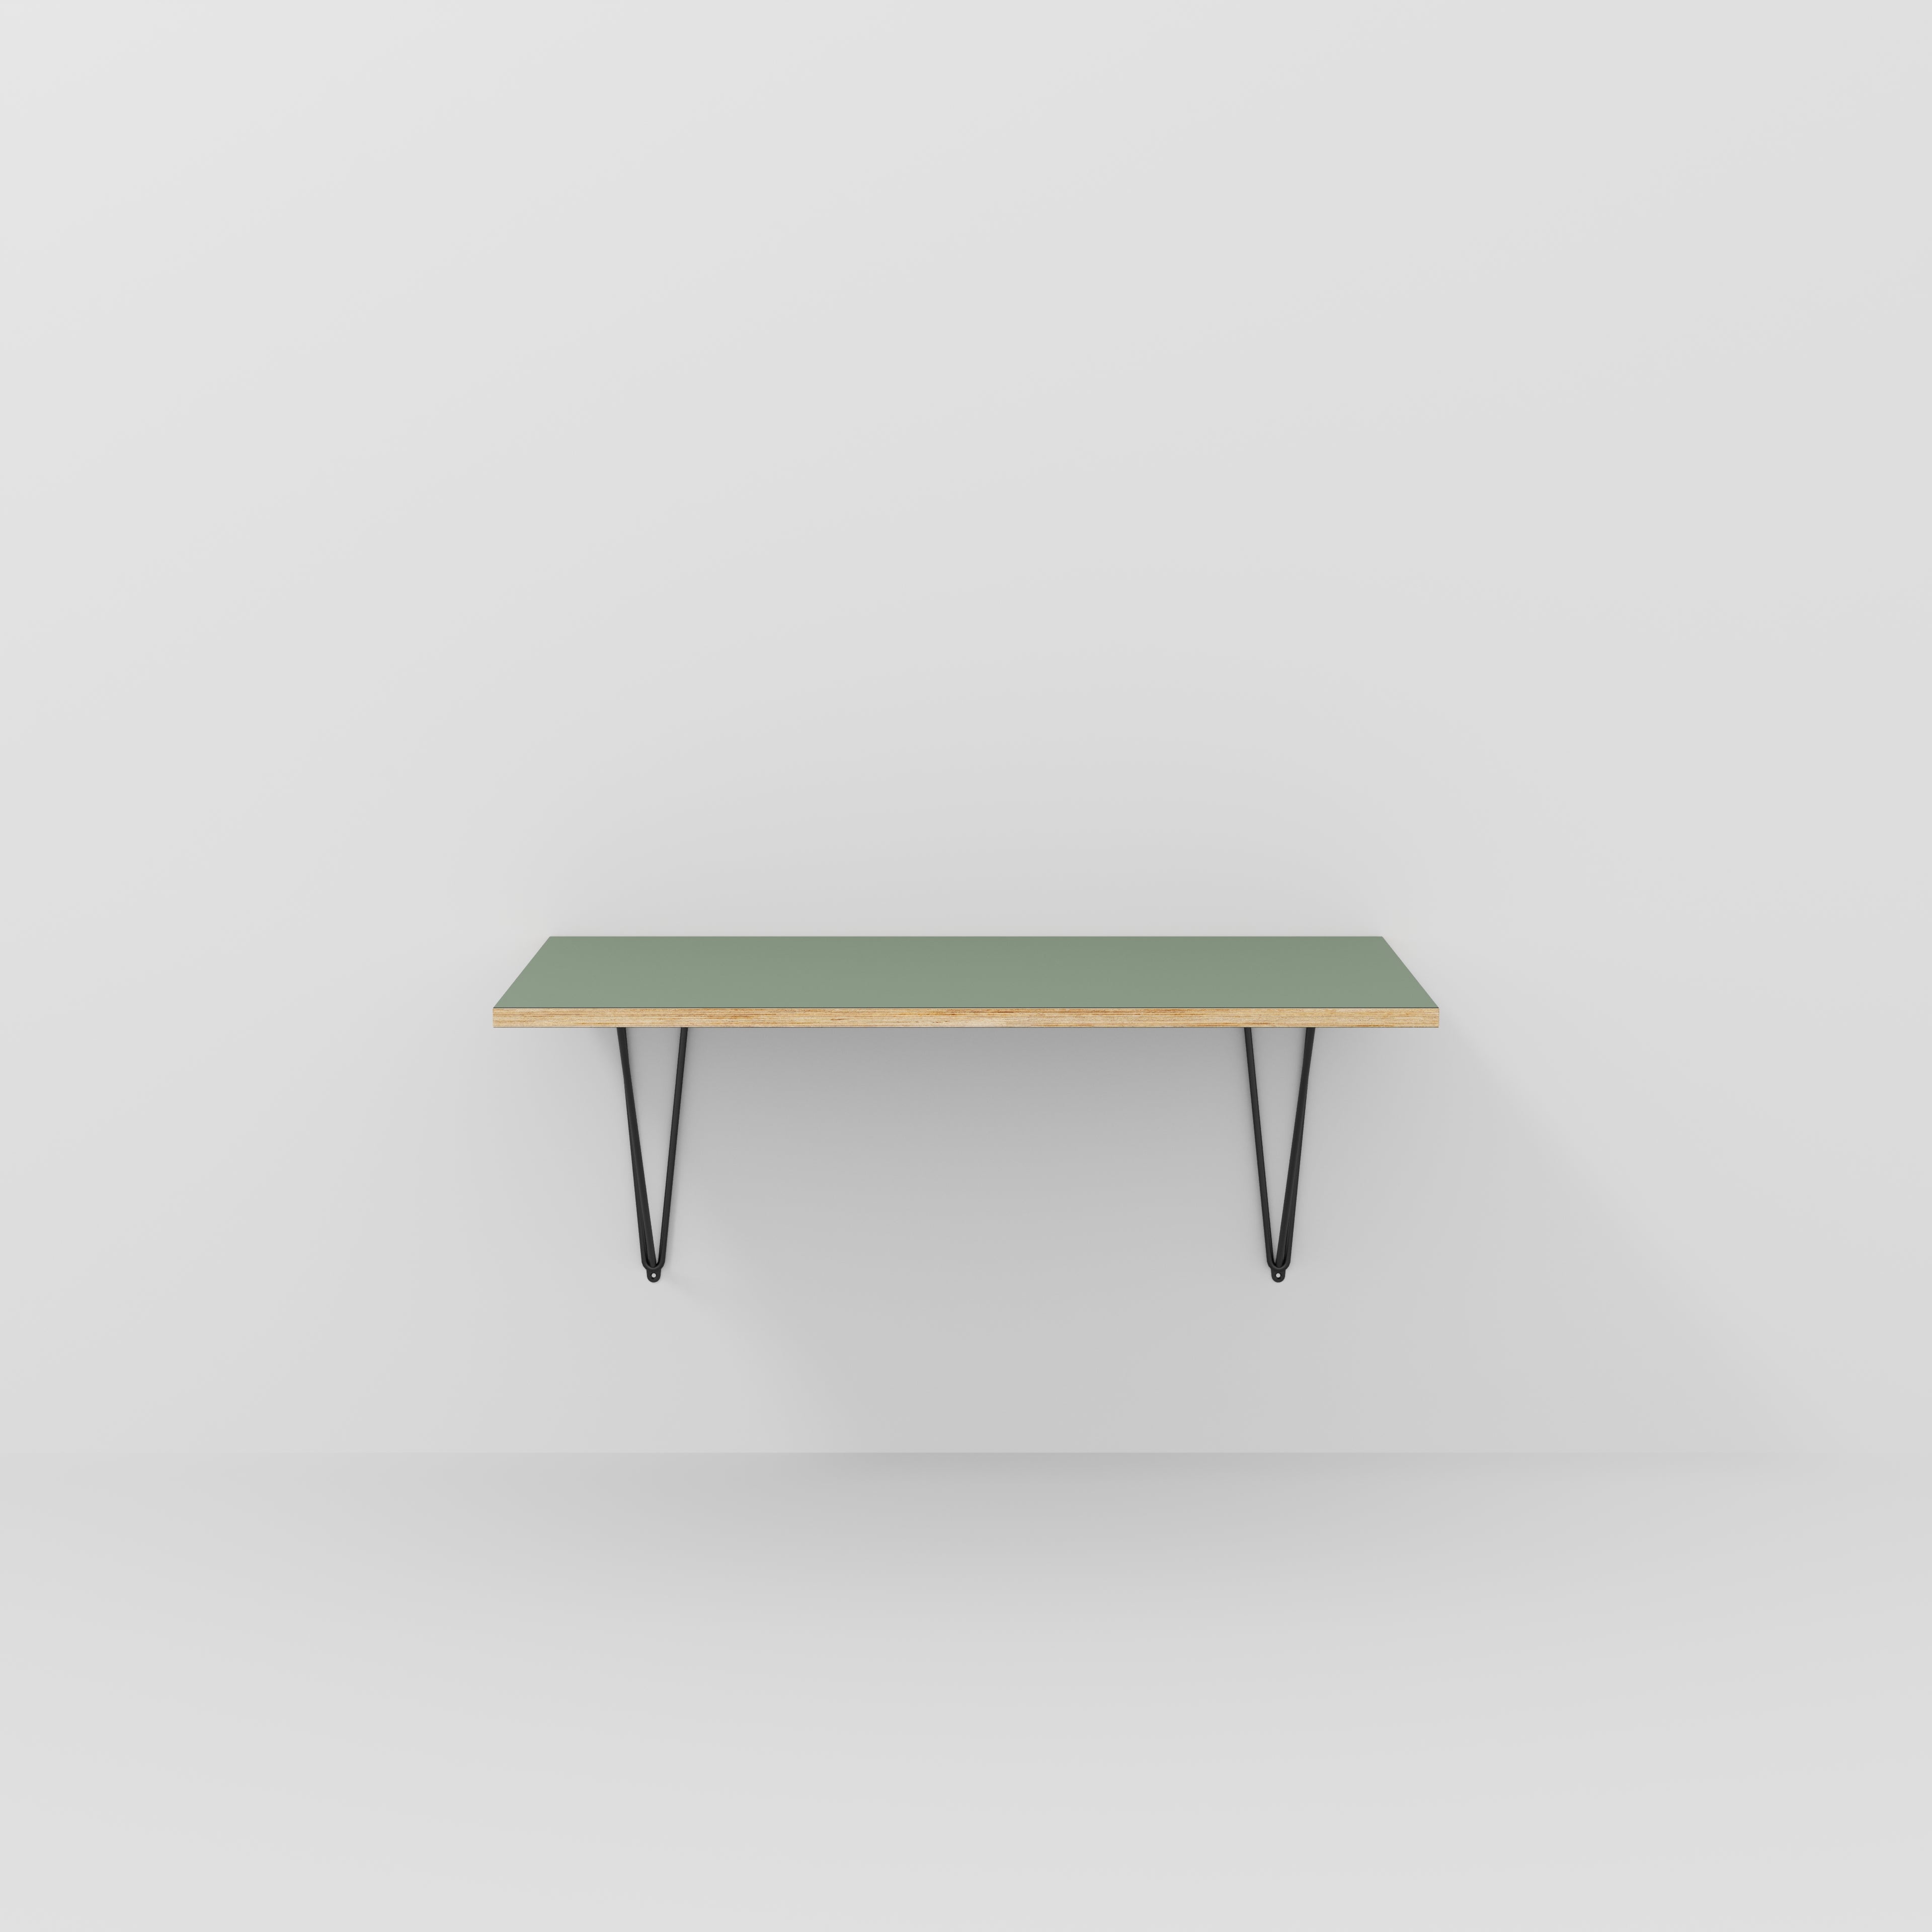 Wall Desk with Black Prism Brackets - Formica Green Slate - 1200(w) x 500(d)